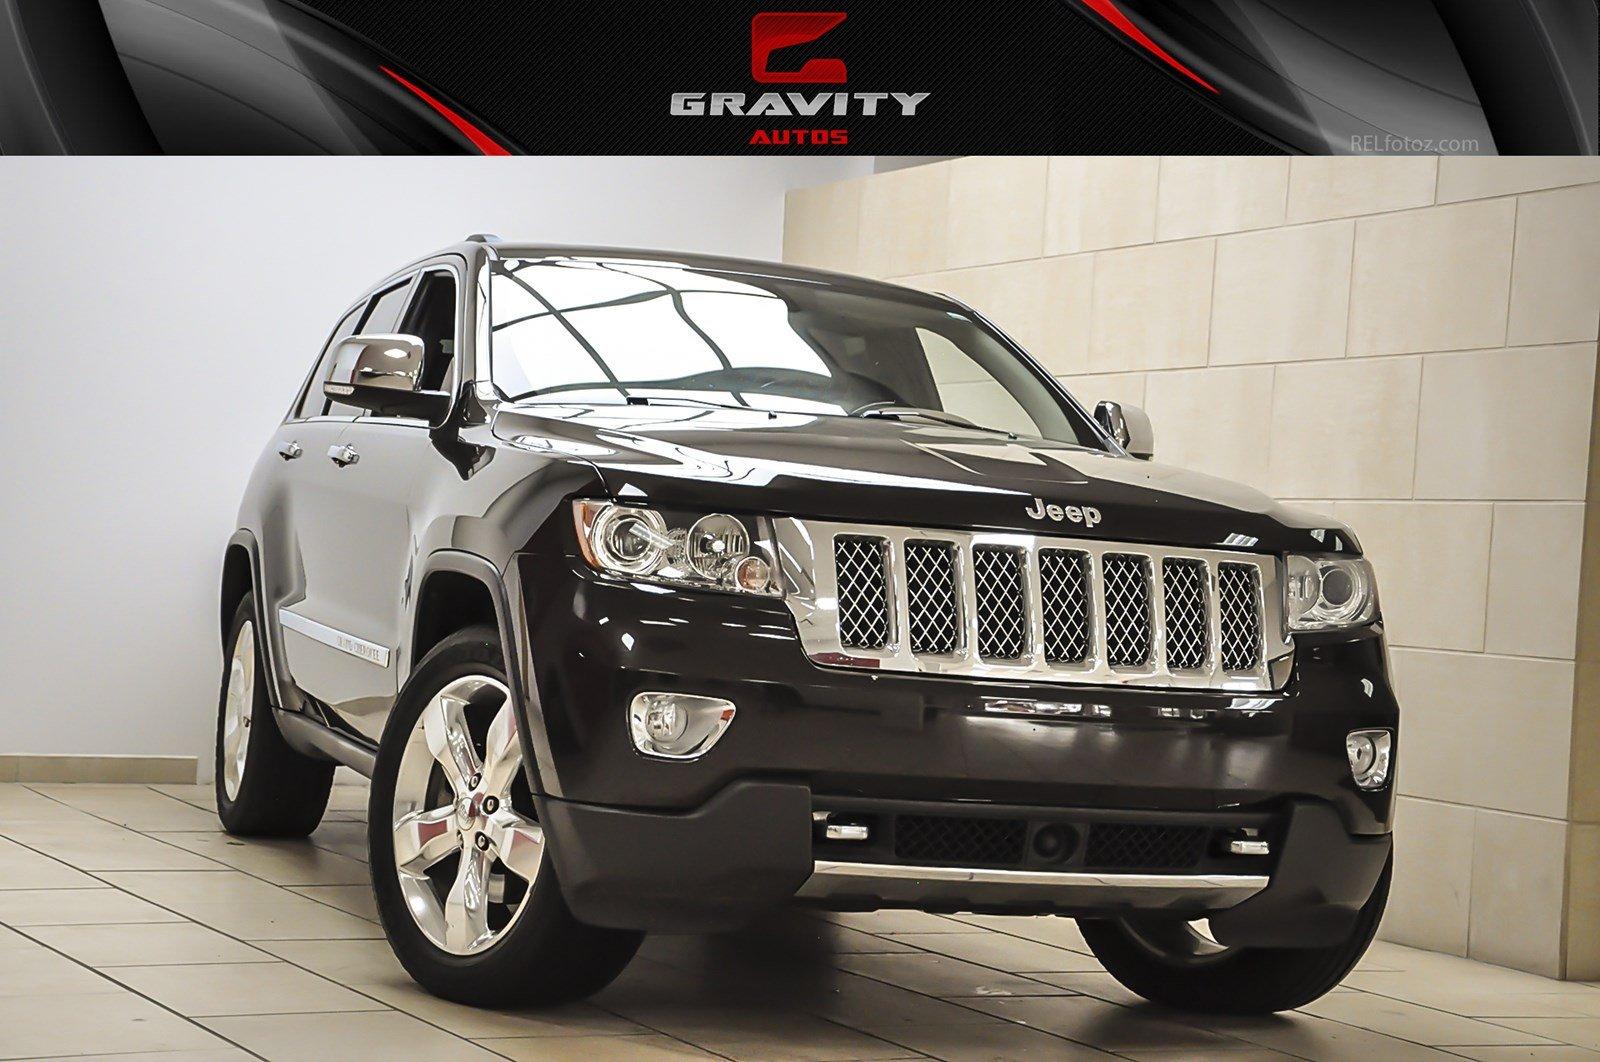 uconnect jeep grand cherokee 2012